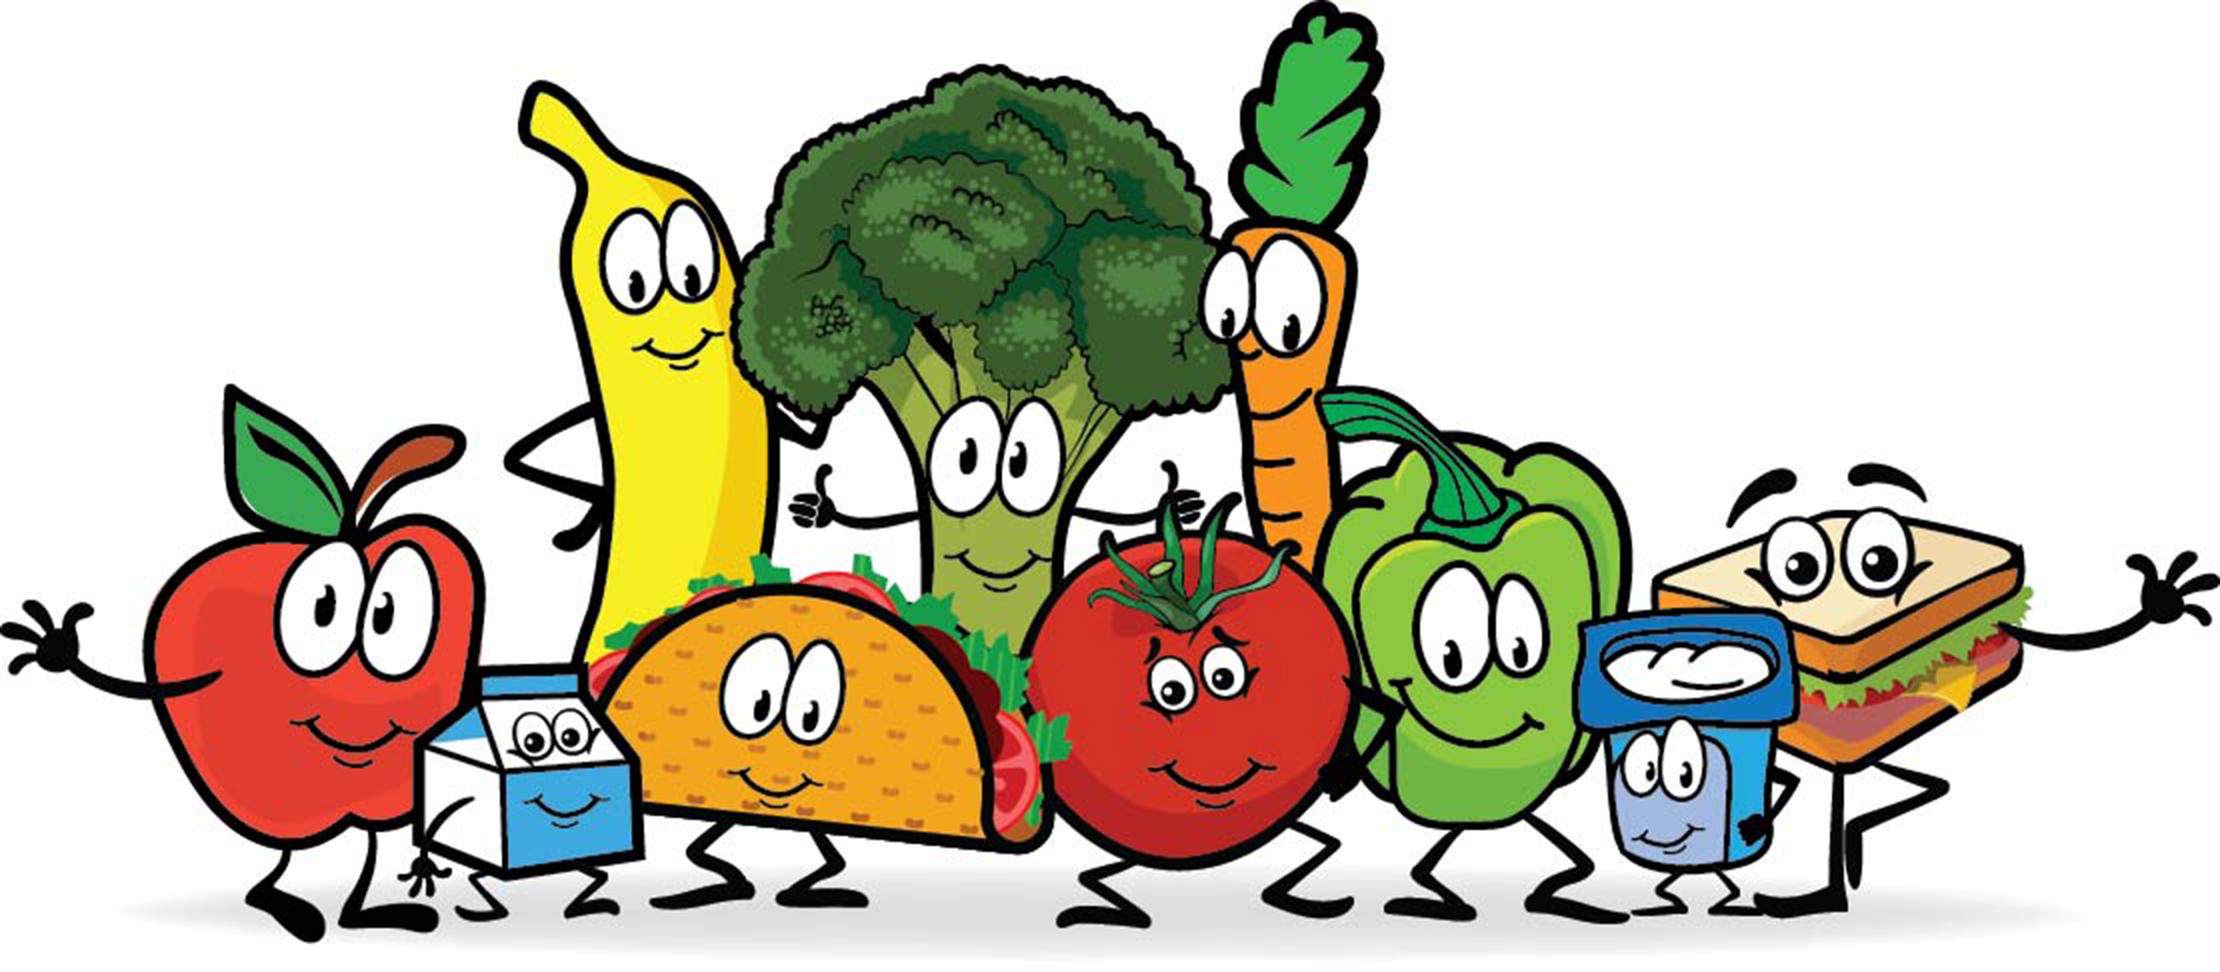 cafeteria clipart school meal